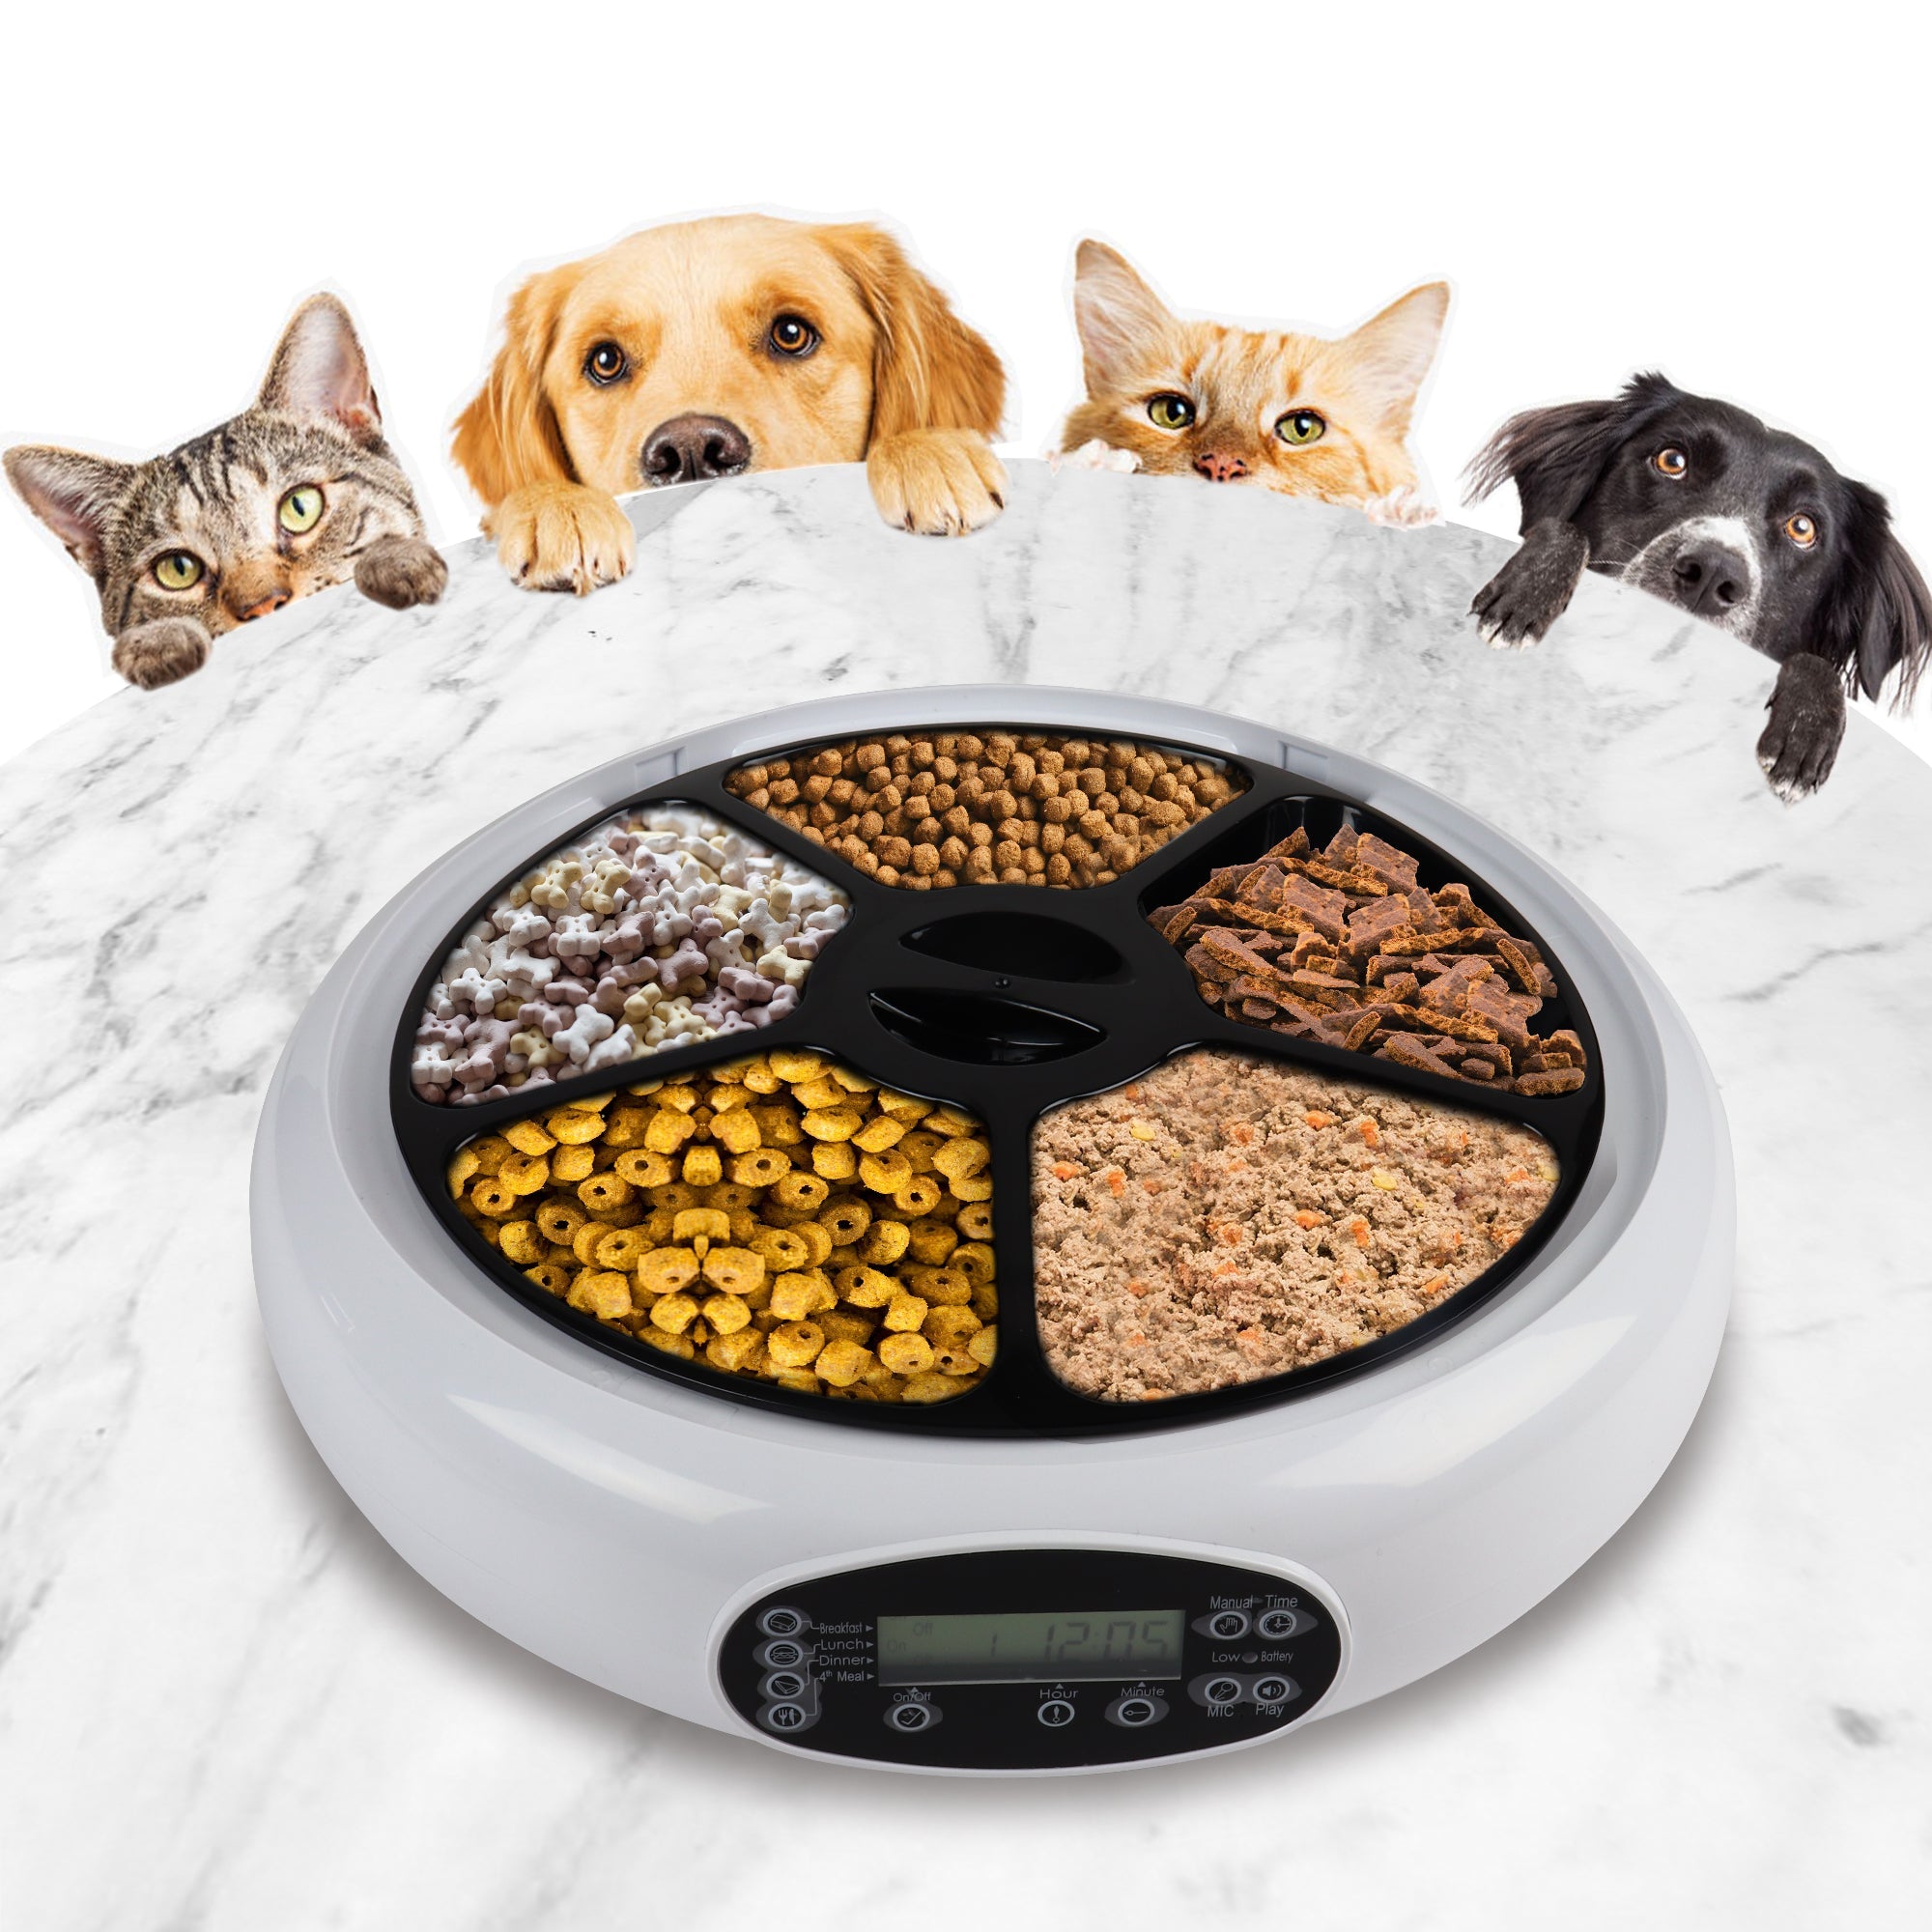 Enhanced image of Lentek 5-meal automatic pet feeder, with lid off and each compartment filled with pet food, on a marbled white surface with the faces of two cats and two dogs peering over it